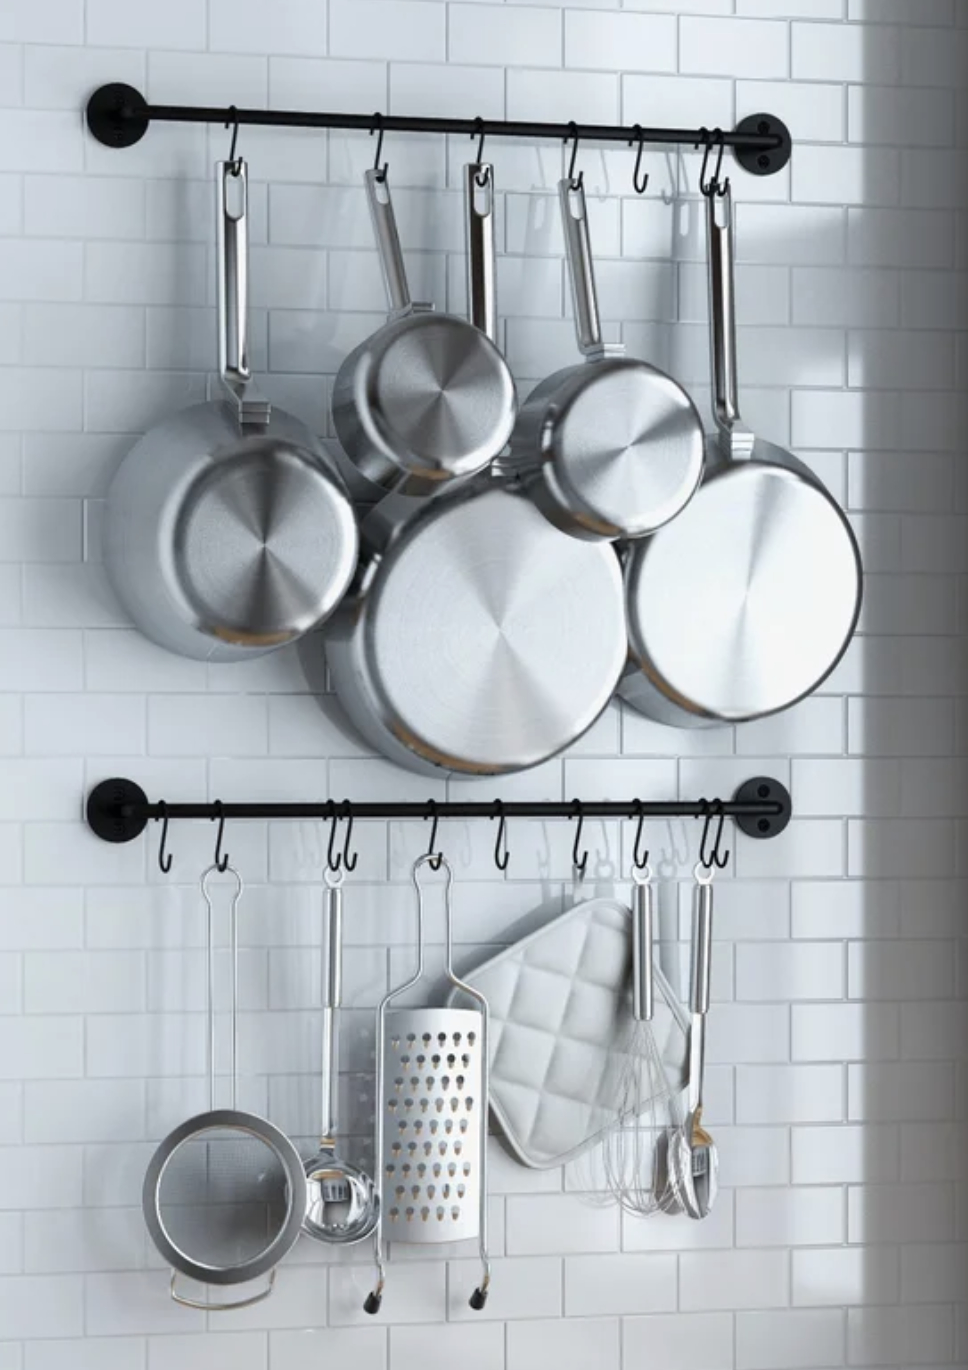 pots and pans hanging from two pot hangers